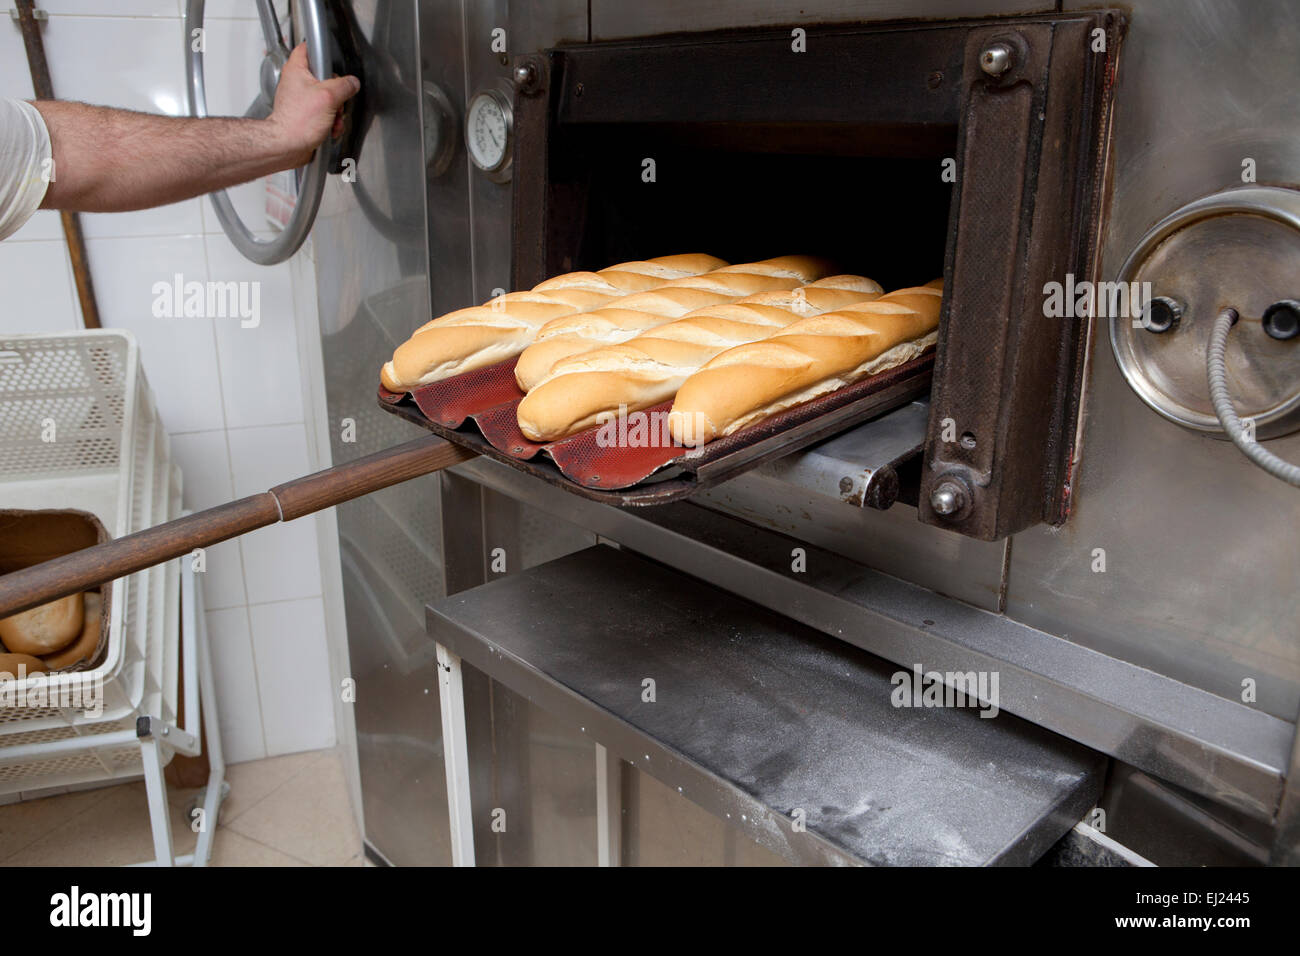 Manufacturing process of spanish bread Stock Photo